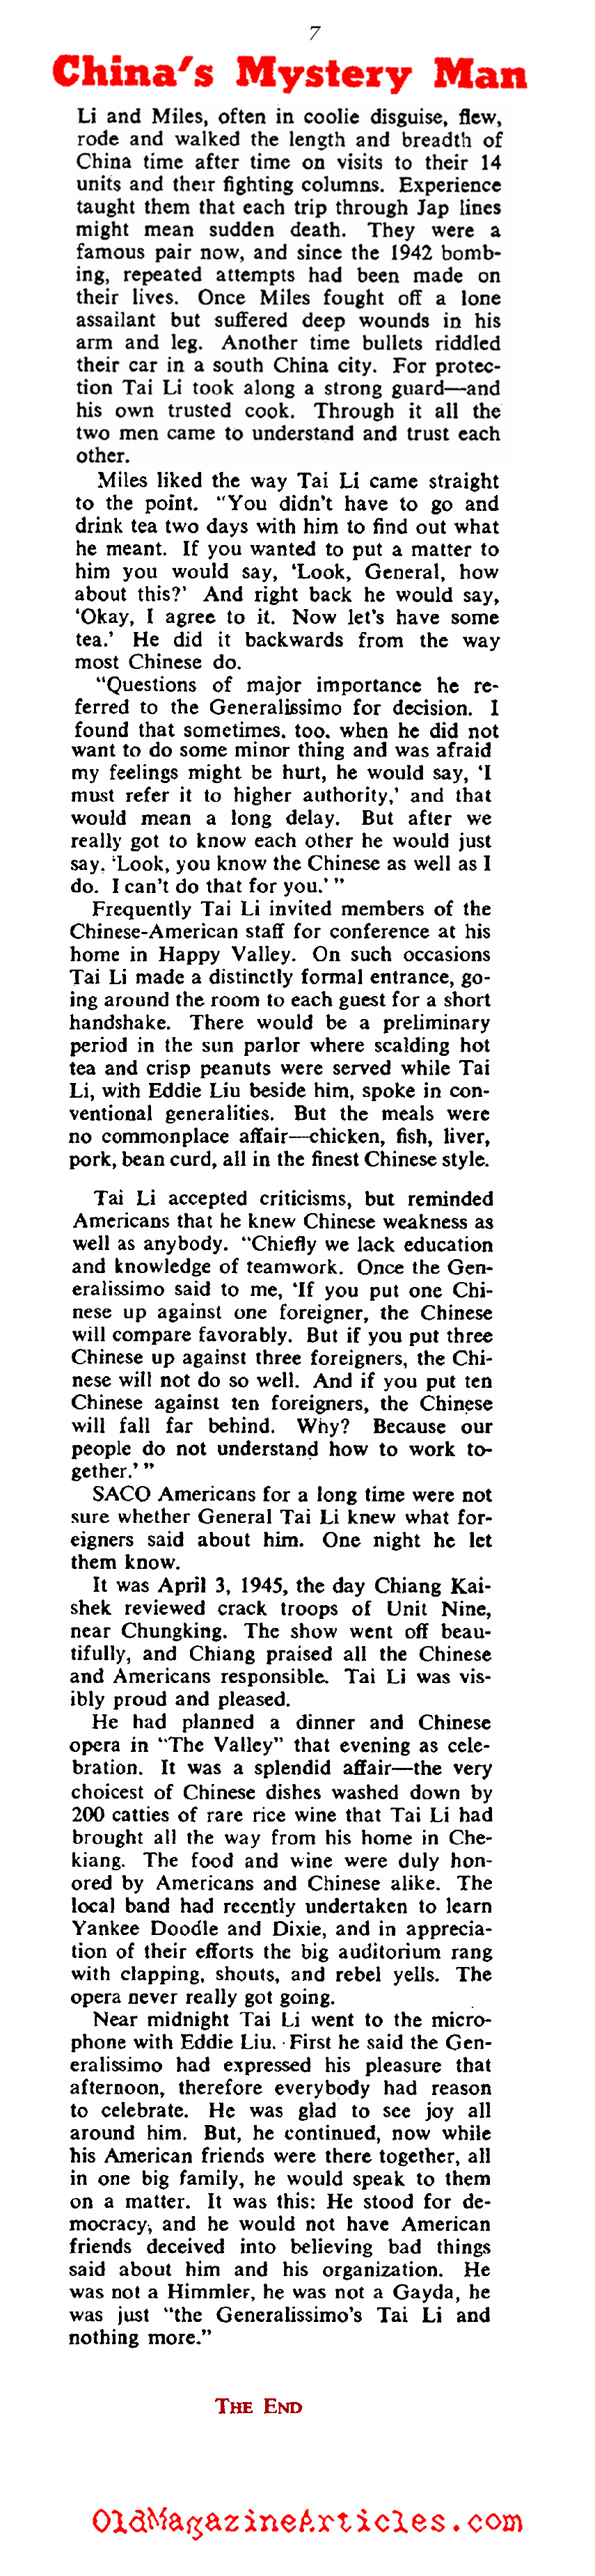 General Dai Li: ''The Himmler of The East (Collier's, 1946)